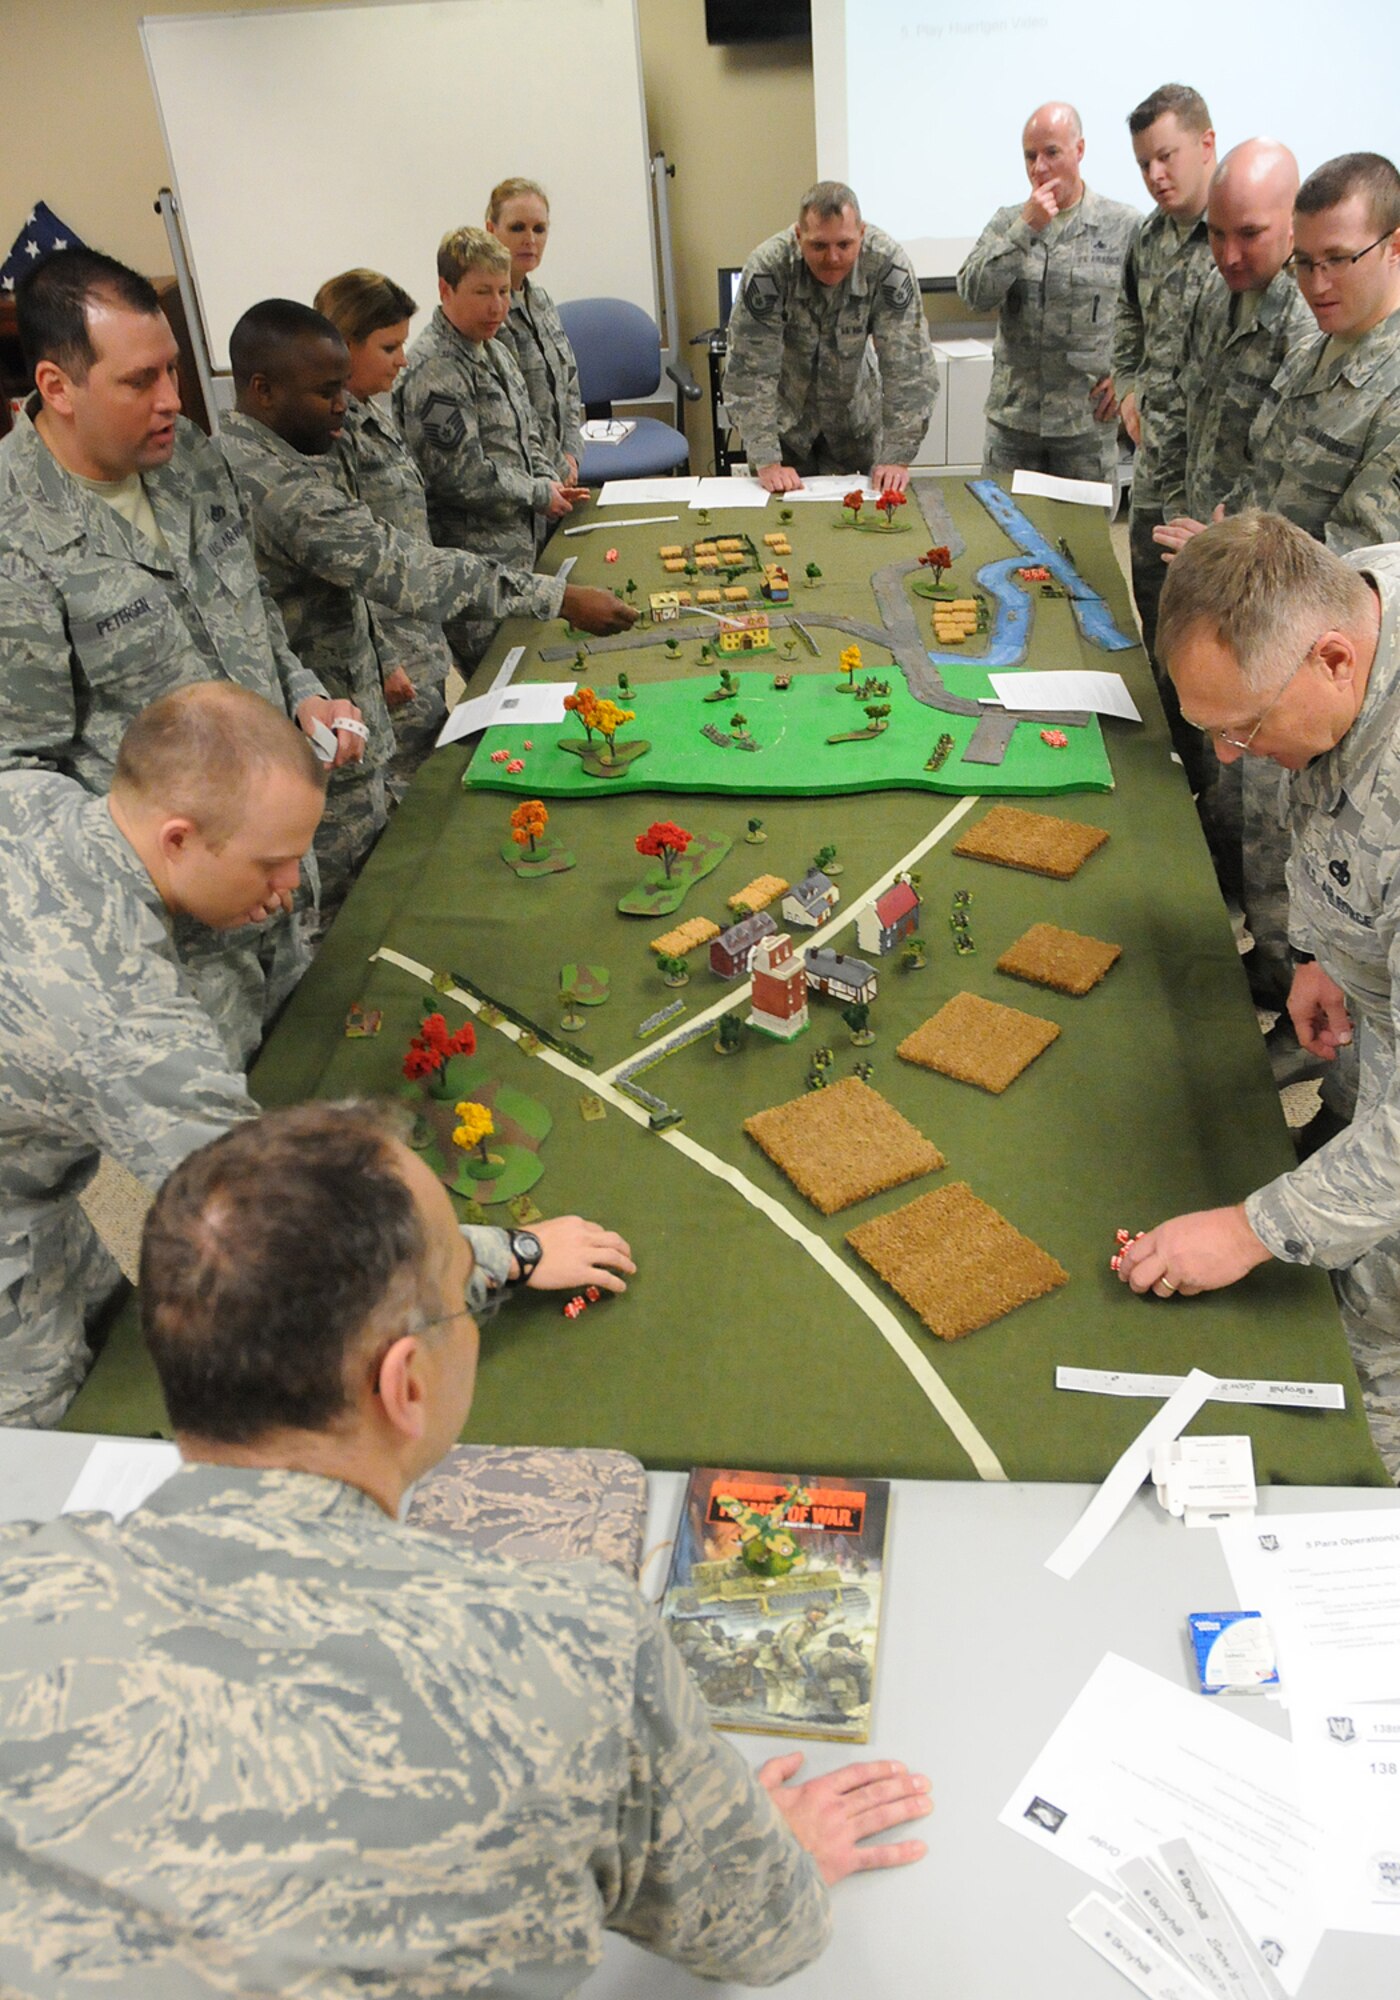 Members of the 138th Fighter Wing discuss the concept of operations during a table top exercise at a leadership meeting held Mar. 18, 2015, at the Tulsa Air National Guard Base, Okla.   Since August 2014, every Wednesday following their monthly unit training assembly, leaders from around the 138th Fighter Wing have shared various leadership perspectives, and encouraged open and honest communication while learning from each other at wing leadership meetings .  (U.S. National Guard photo by Senior Master Sgt.  Preston L. Chasteen/Released)